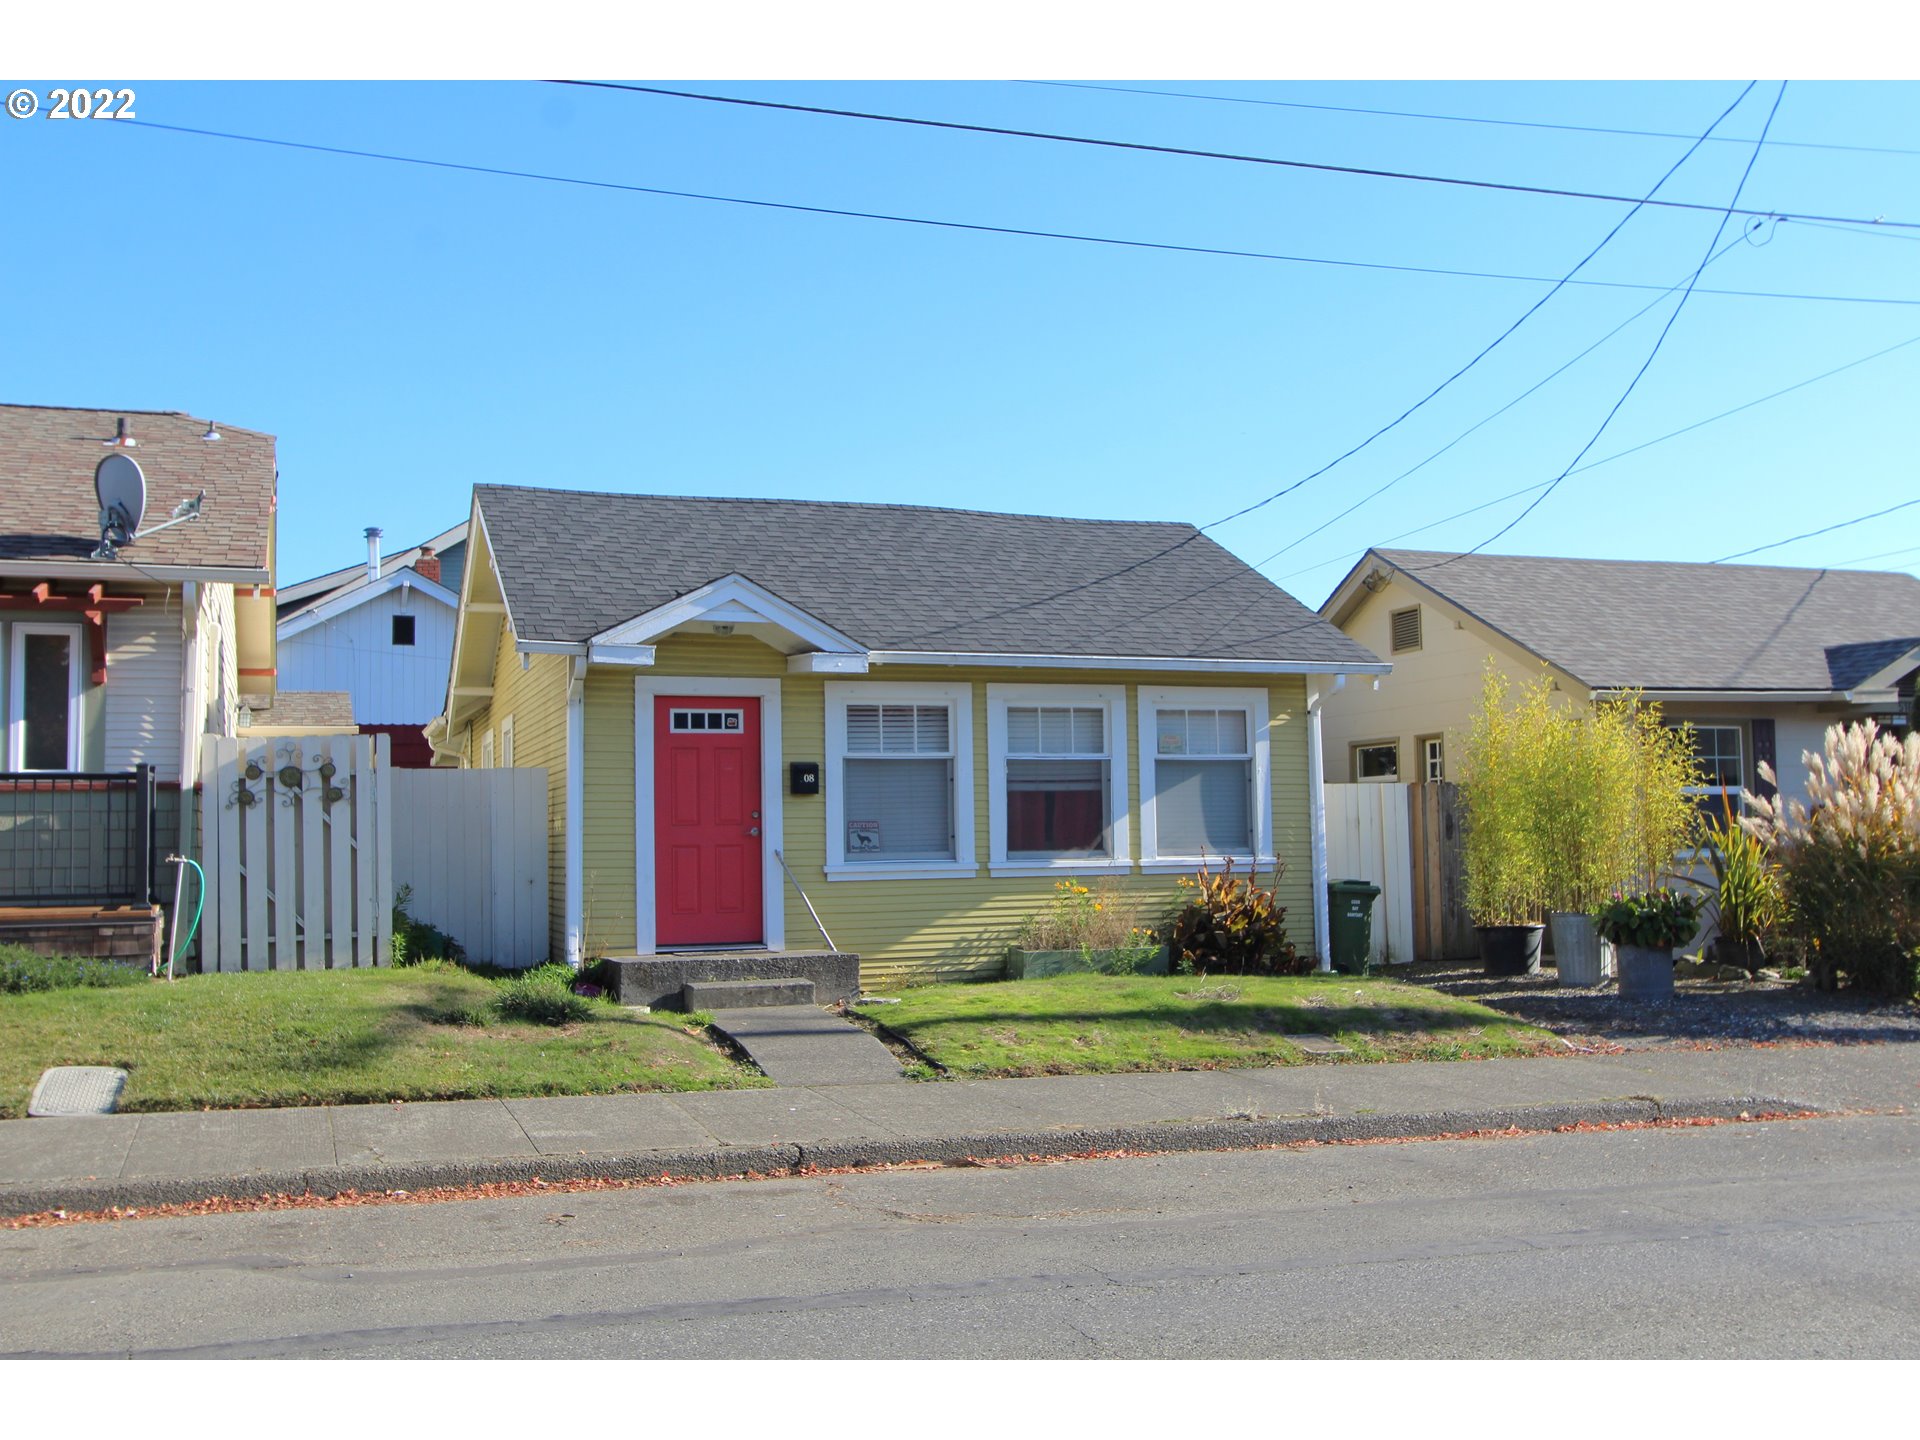 508 S 7TH ST, Coos Bay, OR 97420